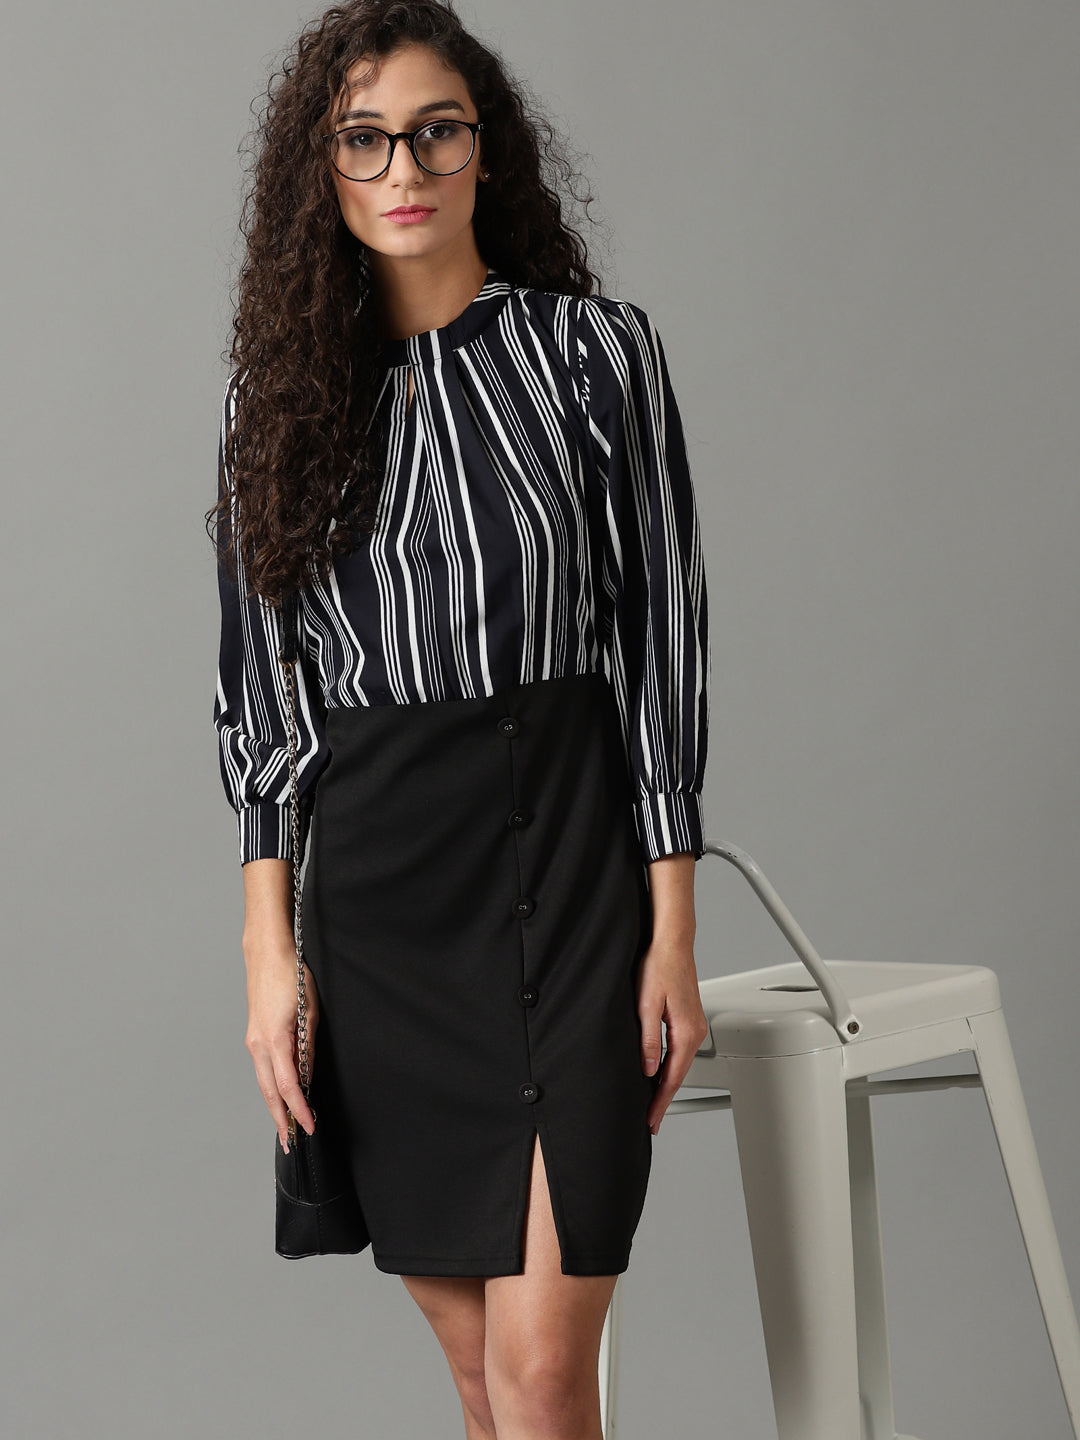 Women's Black Striped Fit and Flare Dress